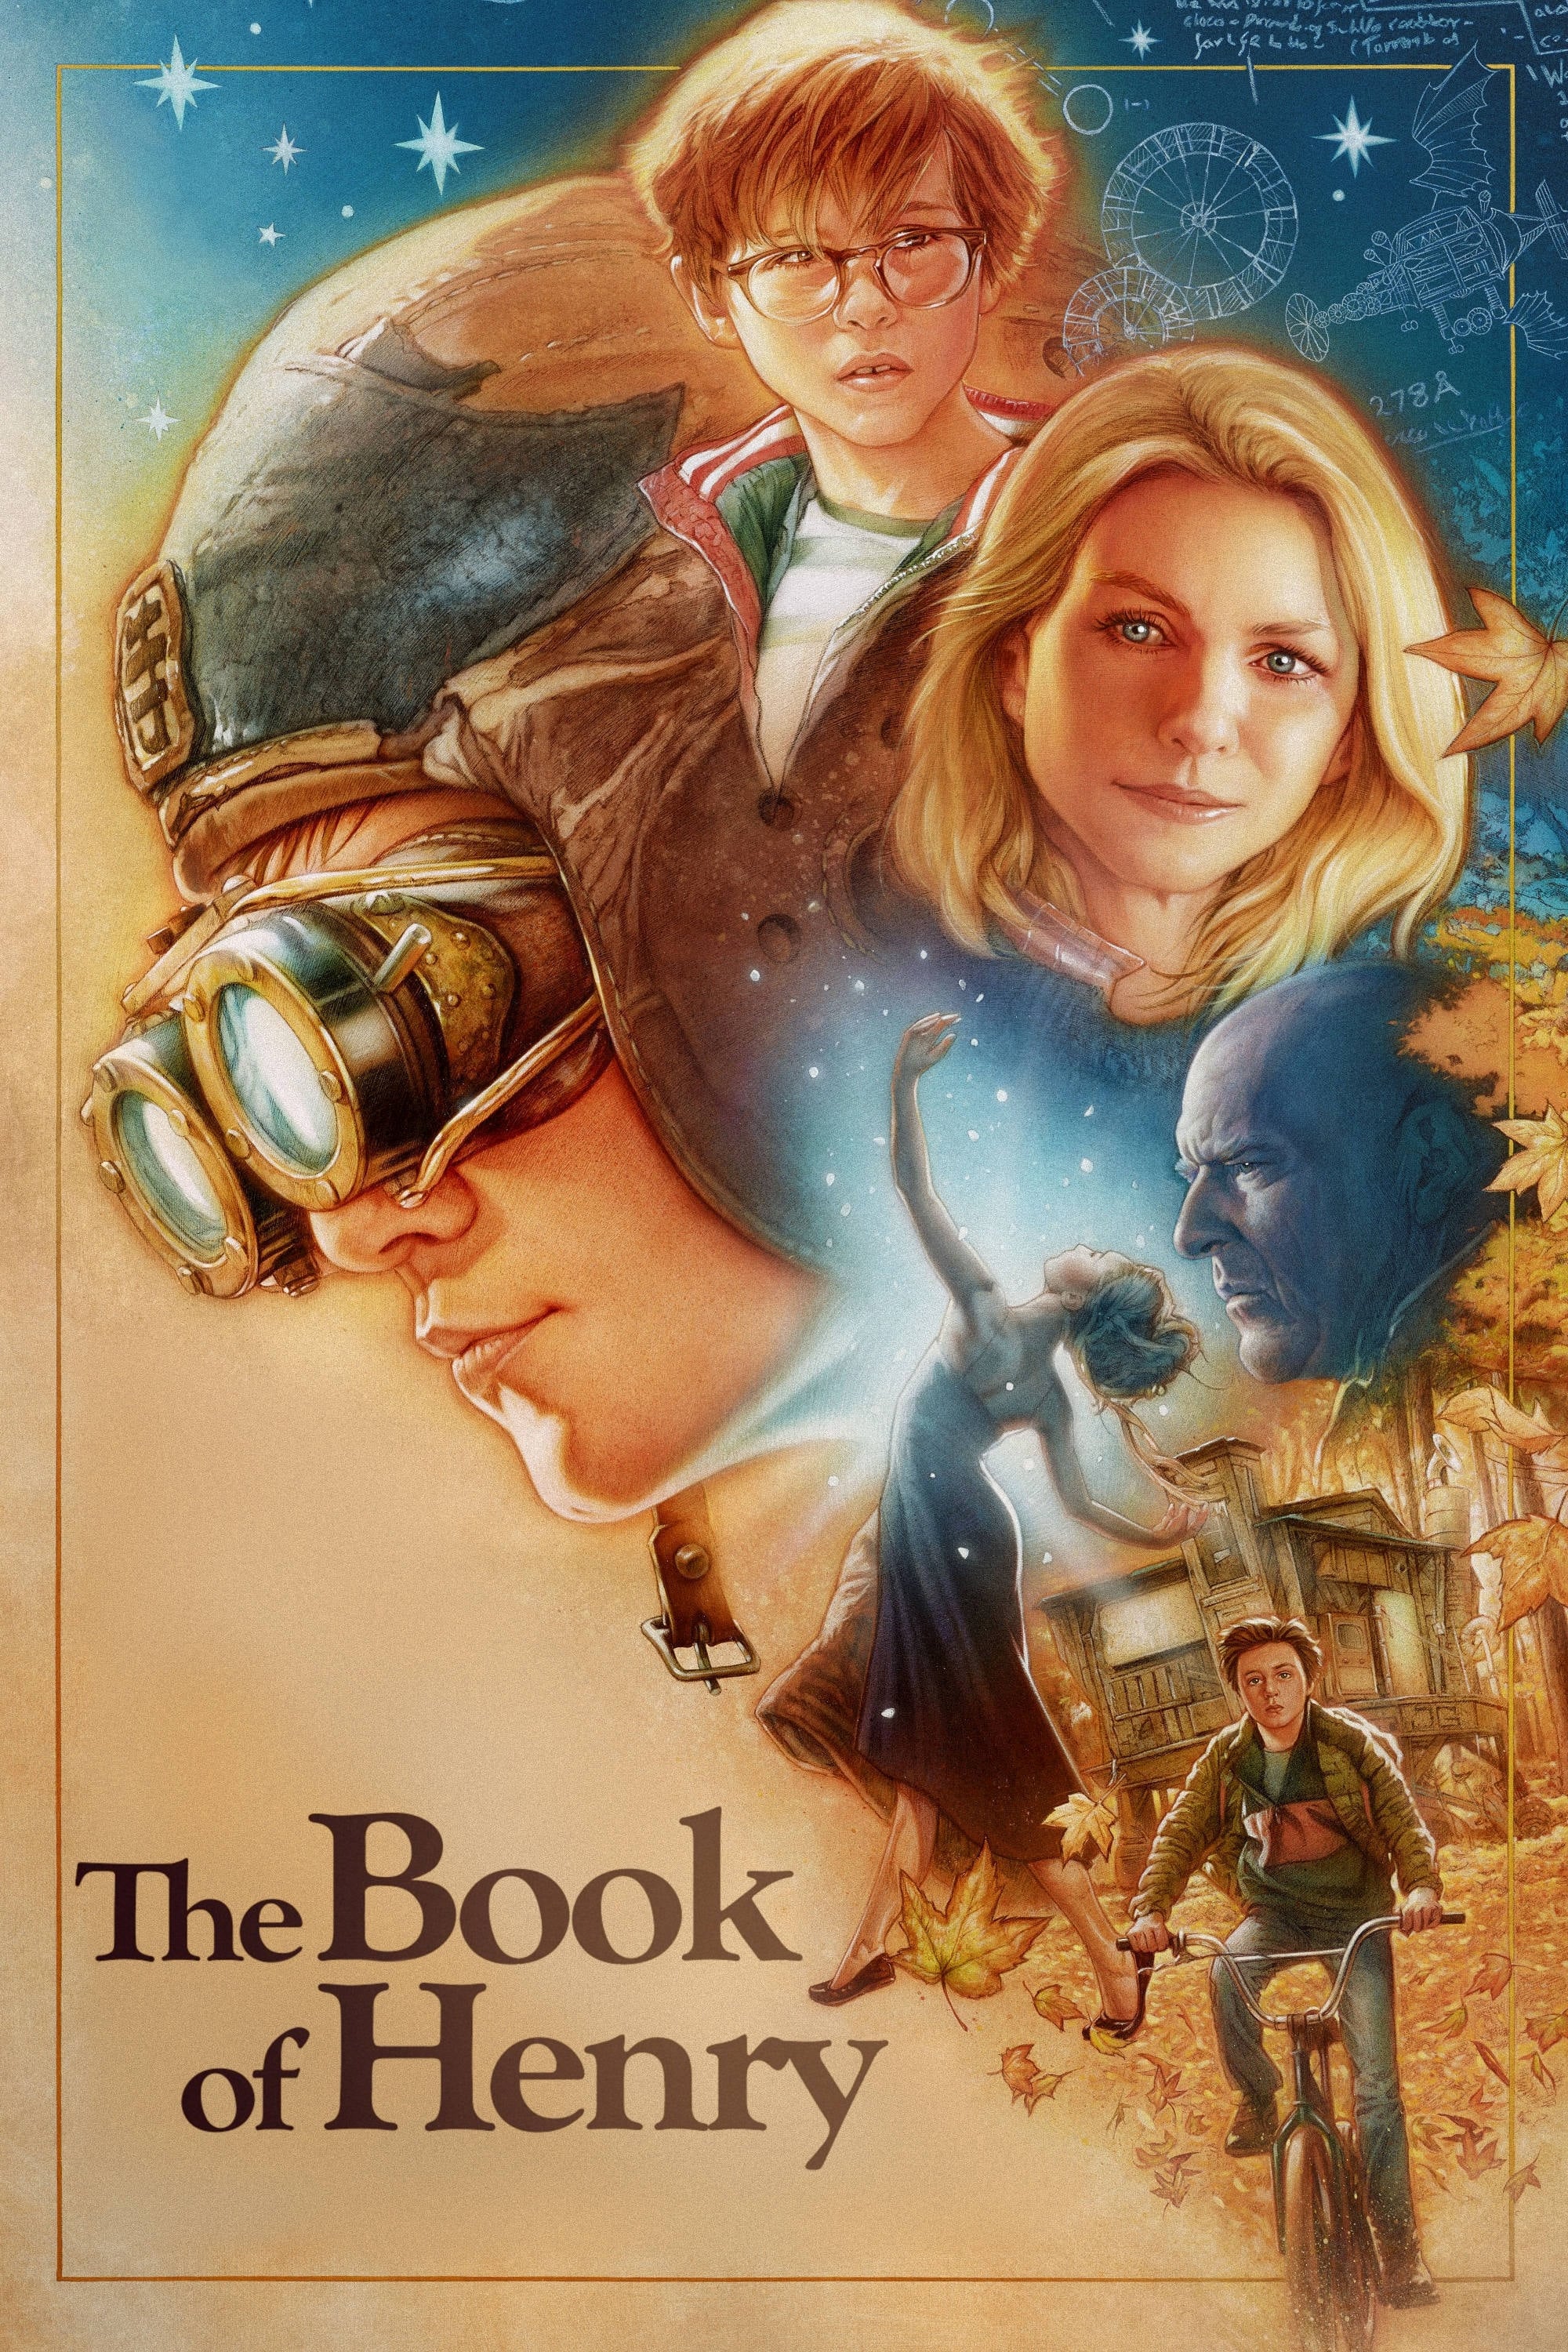 Quyển Sách Của Henry (The Book of Henry) [2017]